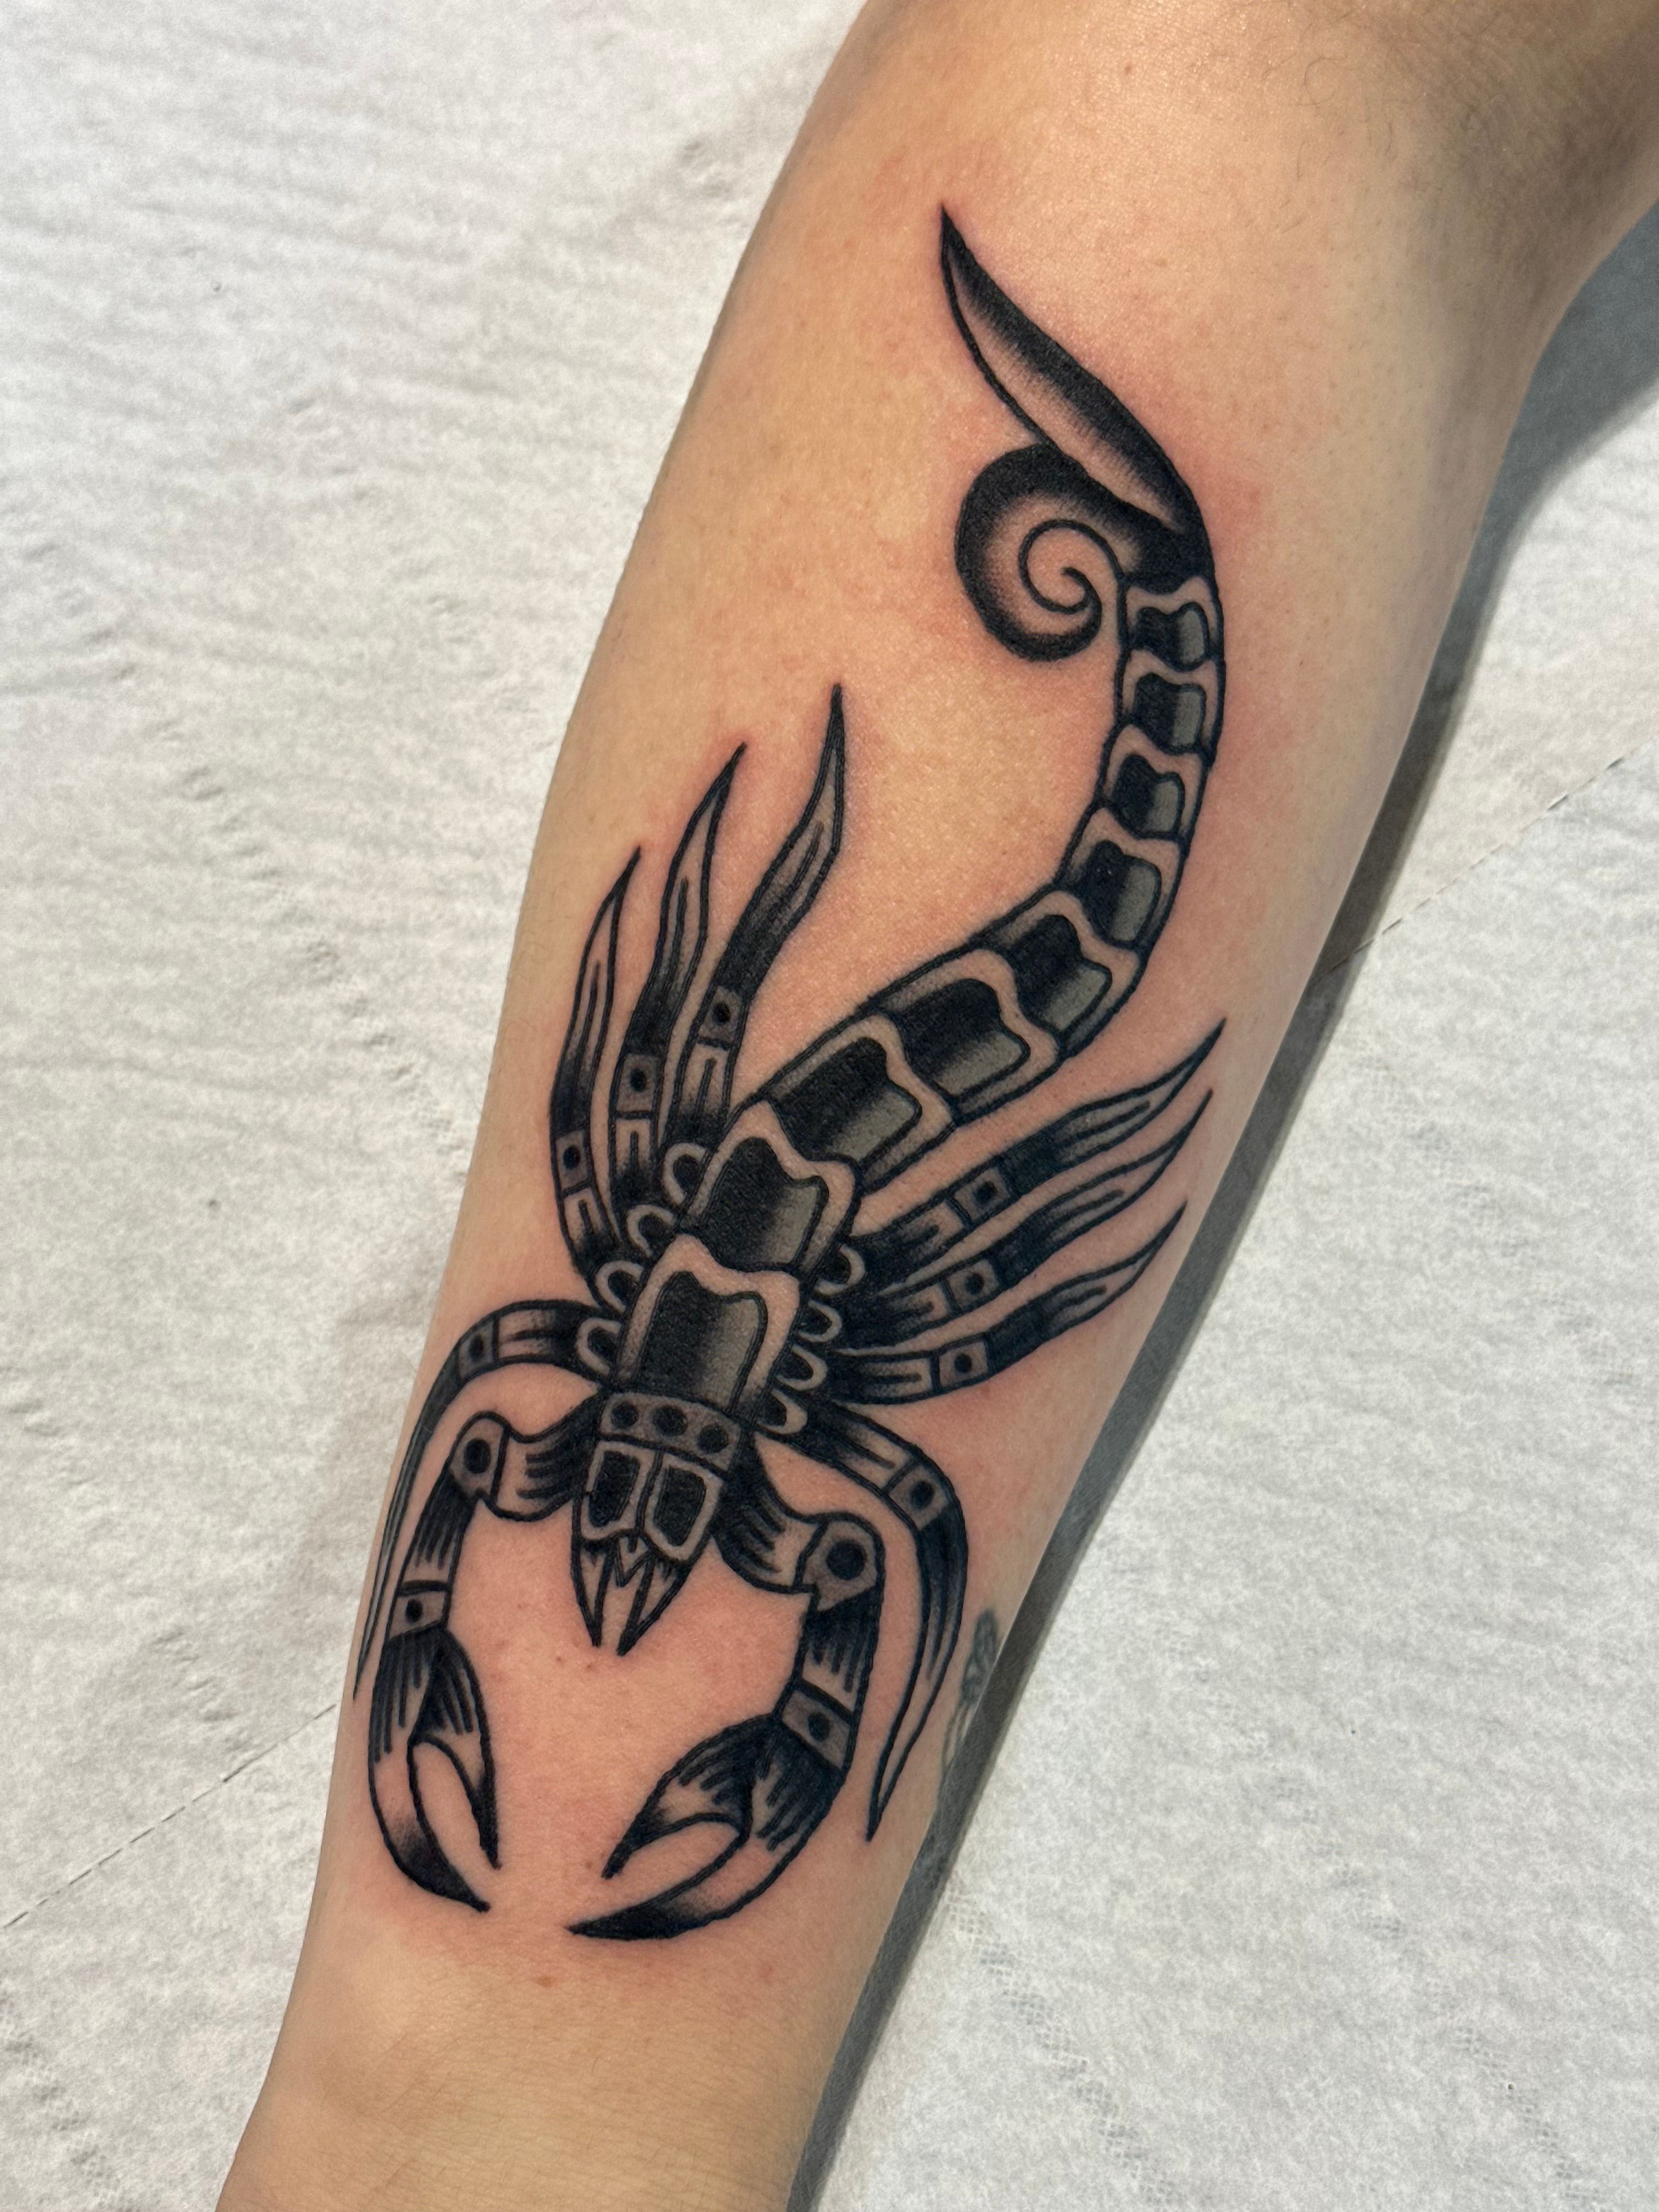 Amazon.com: Baost Fashion Cool 3D Scorpion King Temporary Tattoo Sticker  Waterproof Tattoo Stencil Removeable Non-Toxics Body Art Temporary Tattoos  Paper for Men, Women, Girls, Boys : Everything Else